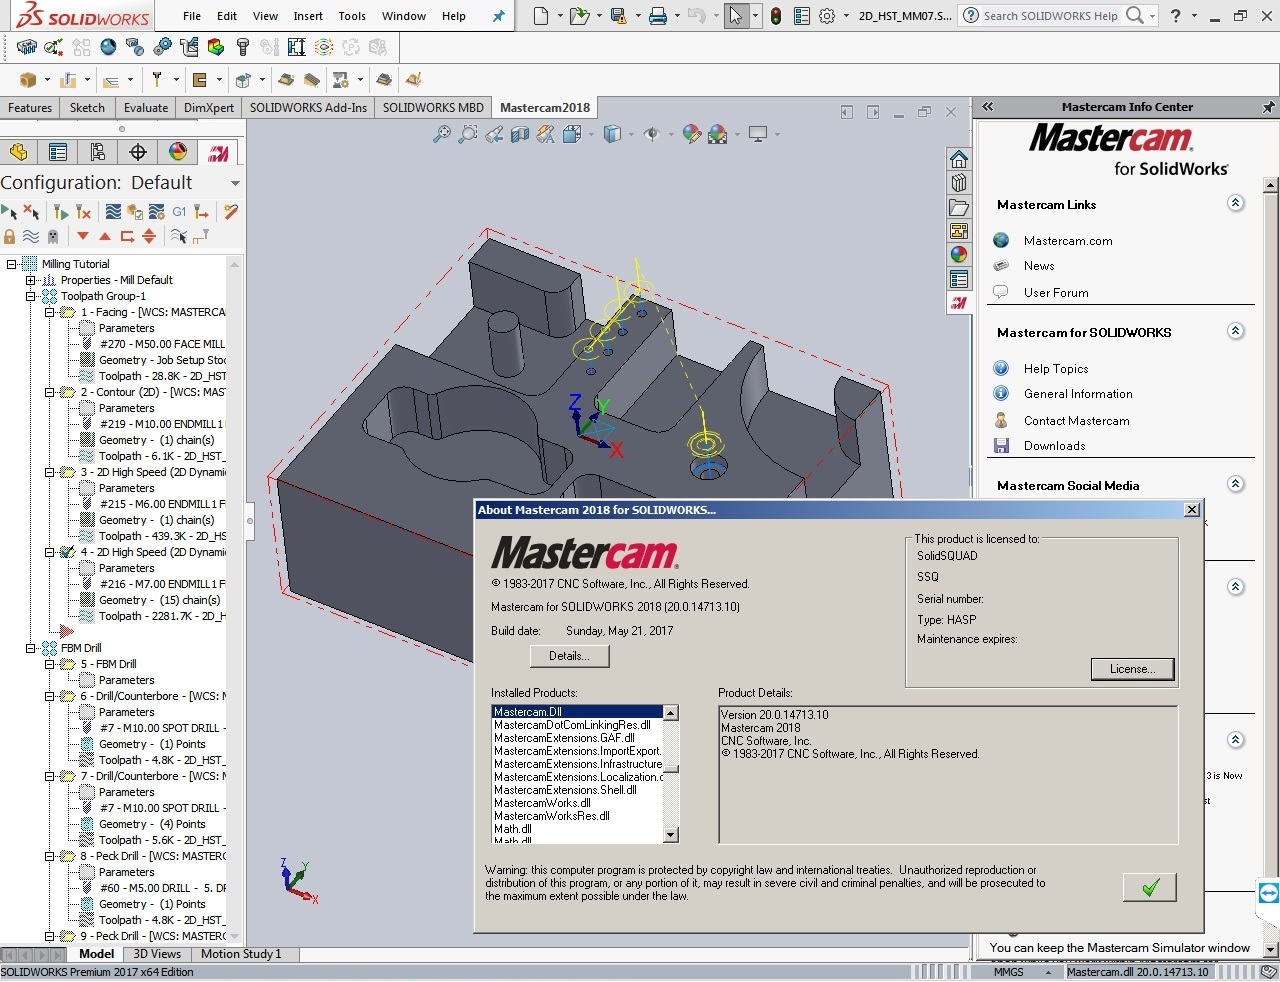 working with Mastercam 2018 (v20.0.14713.10) for SolidWorks 2010-2017 Win64